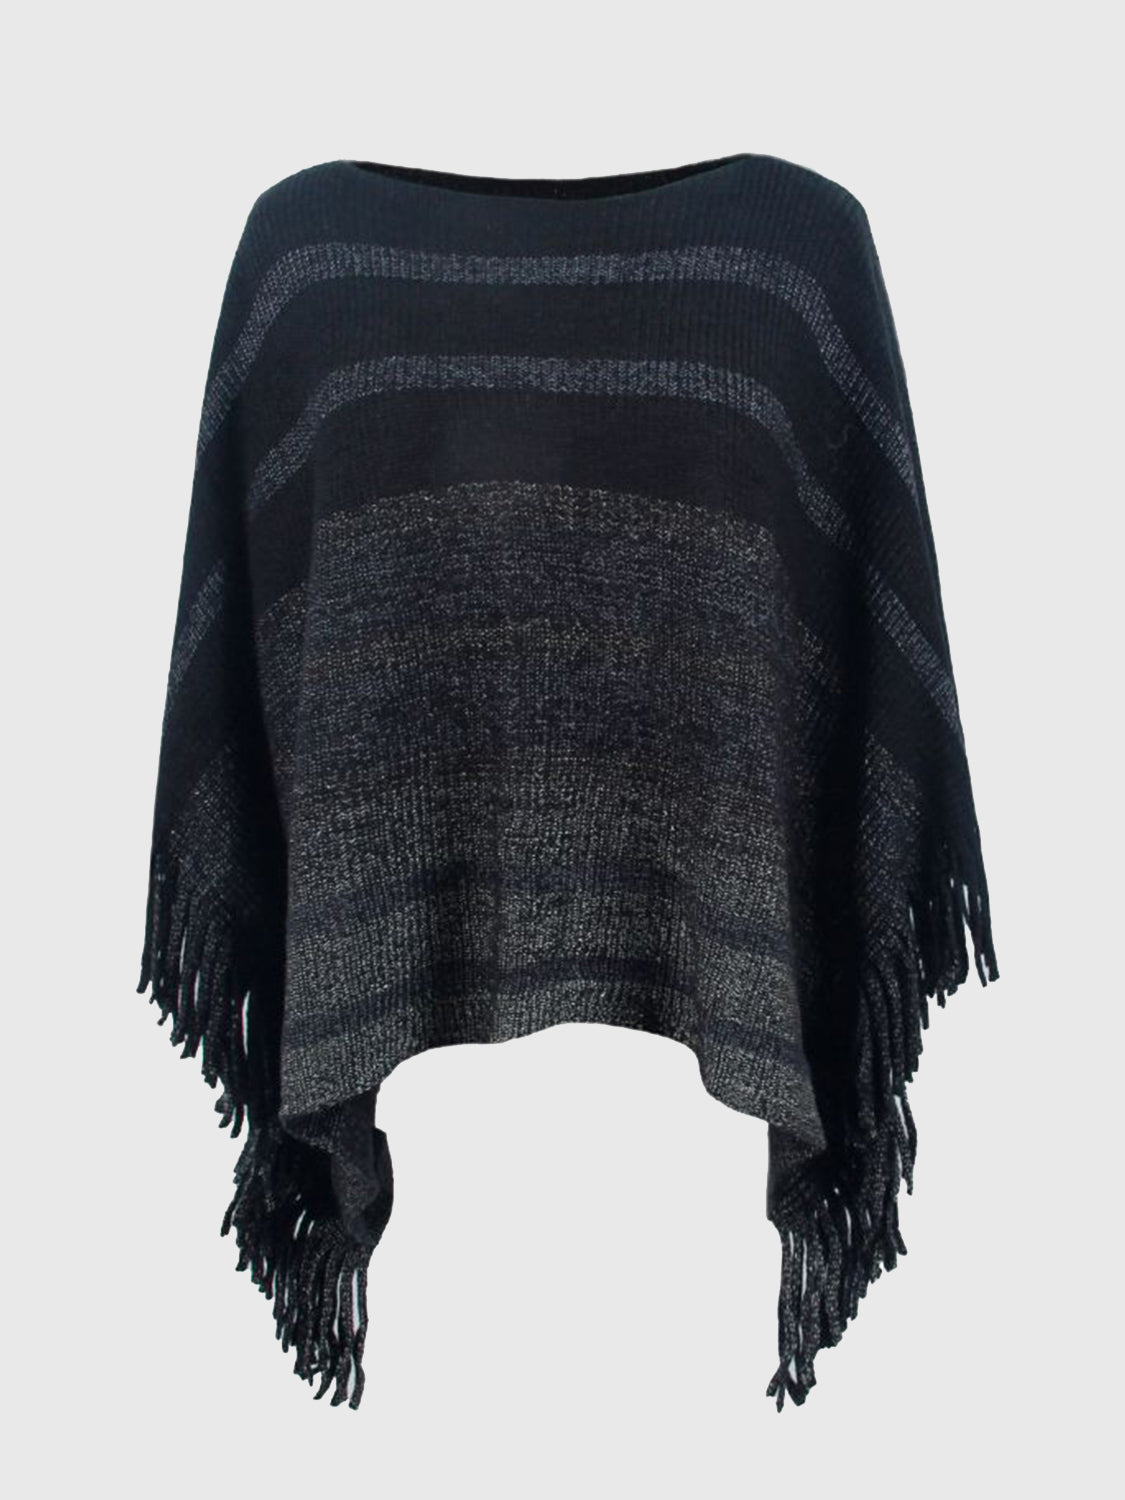 Striped Boat Neck Poncho with Fringes - Babbazon Ponchos